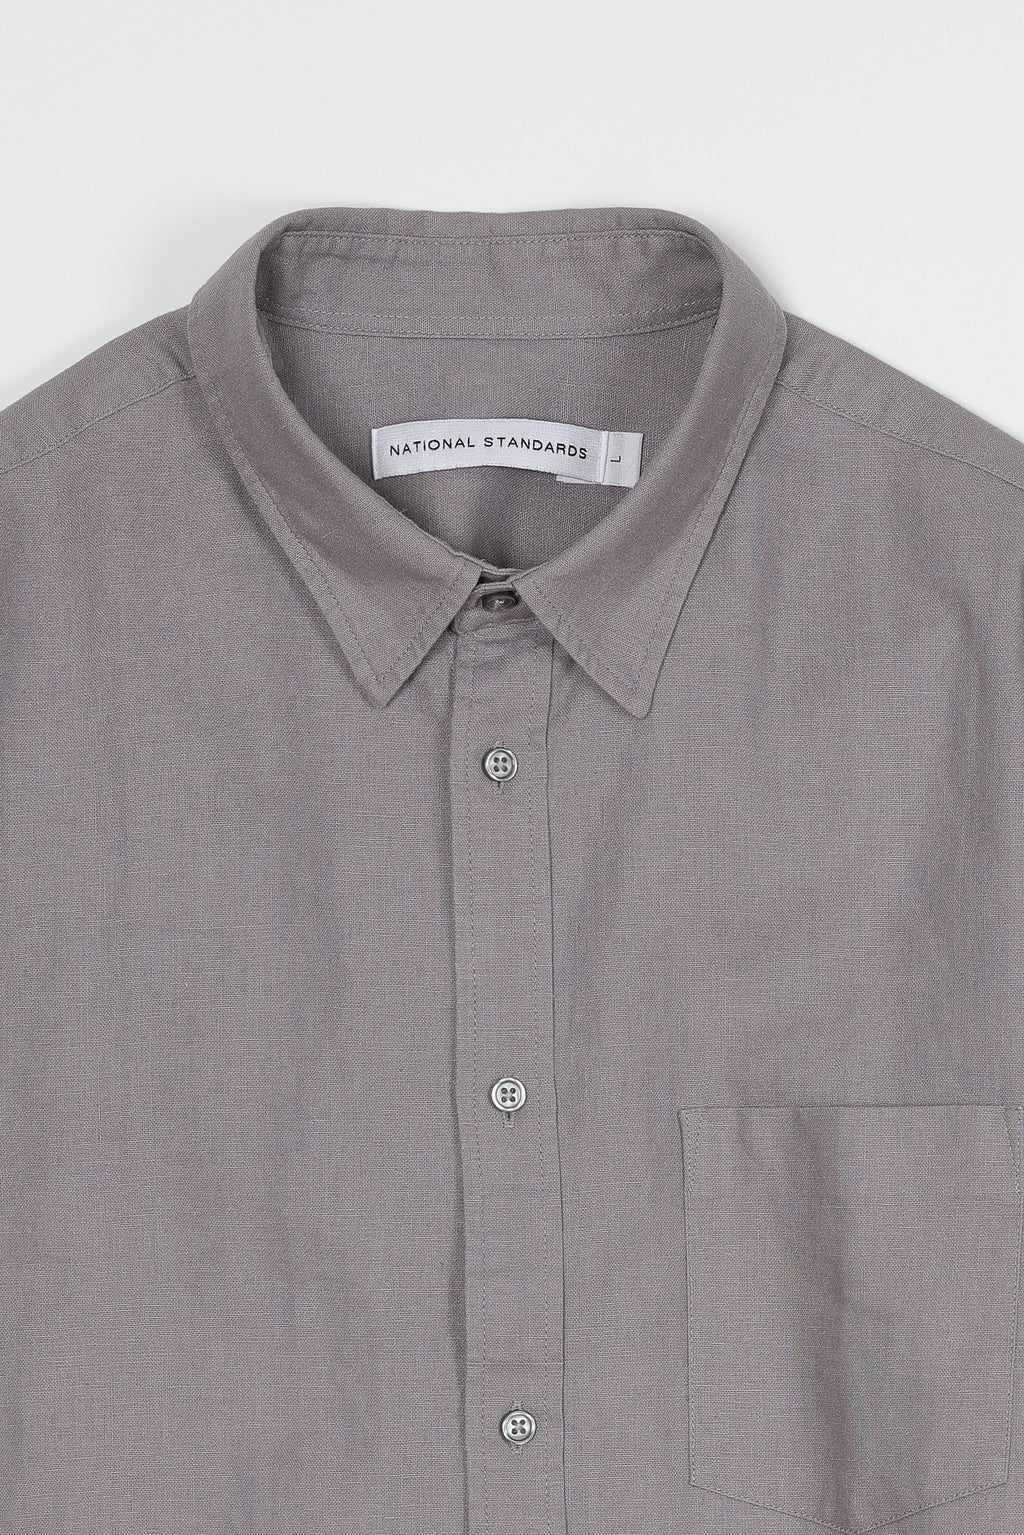 NS1145-188 Japanese Washed Canvas in Grey